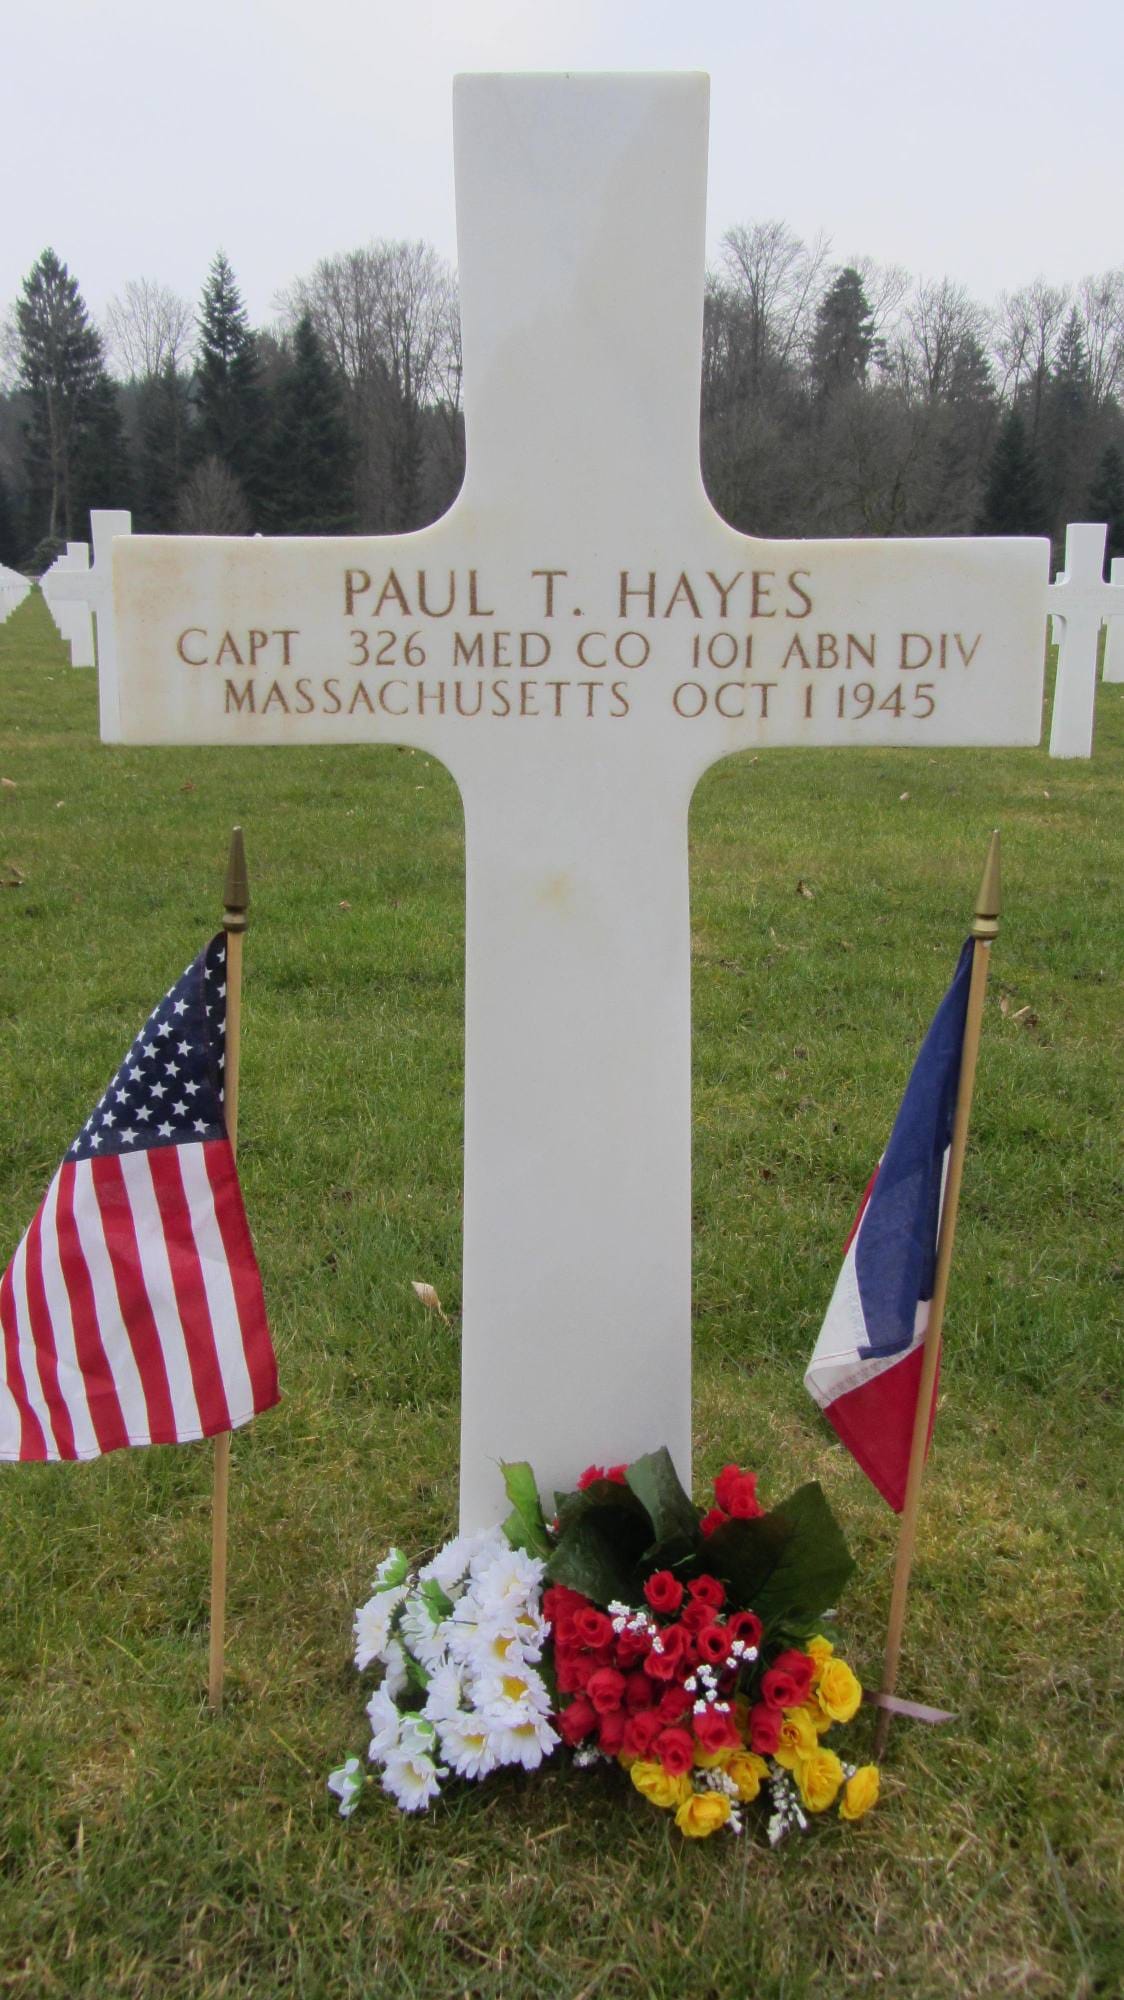 CPT Paul T. Hayes